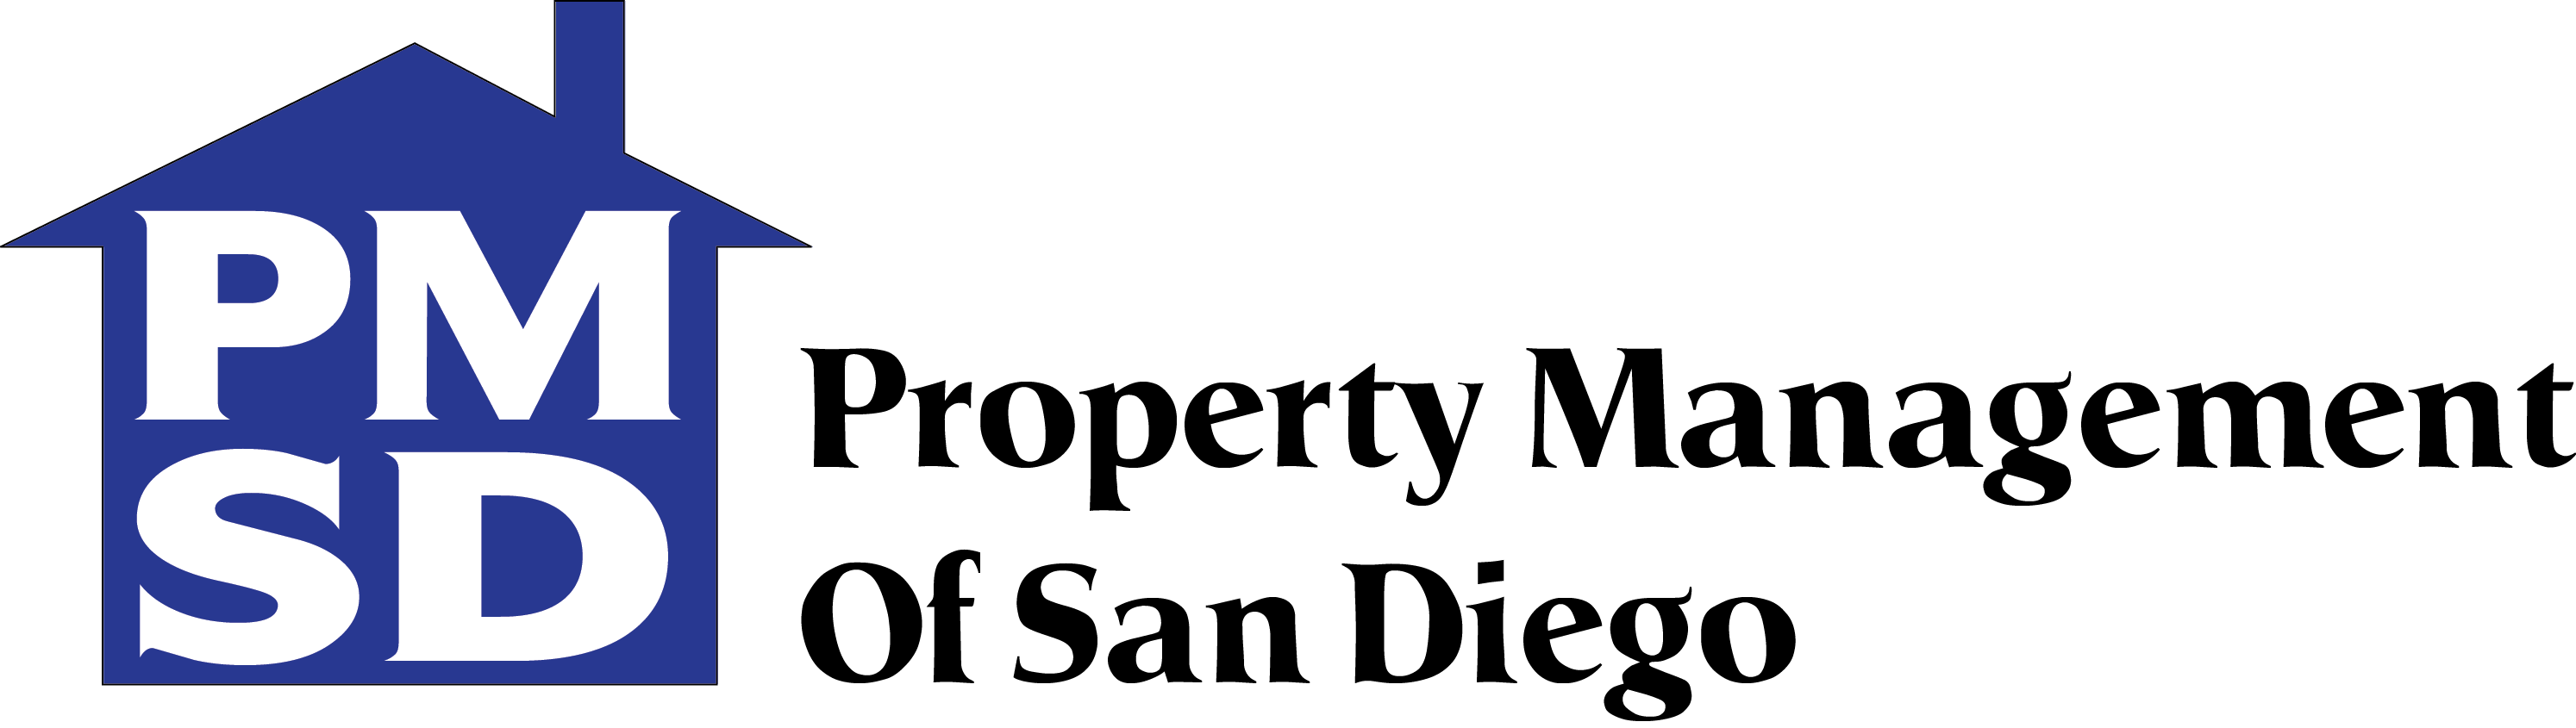 Property Management of San Diego